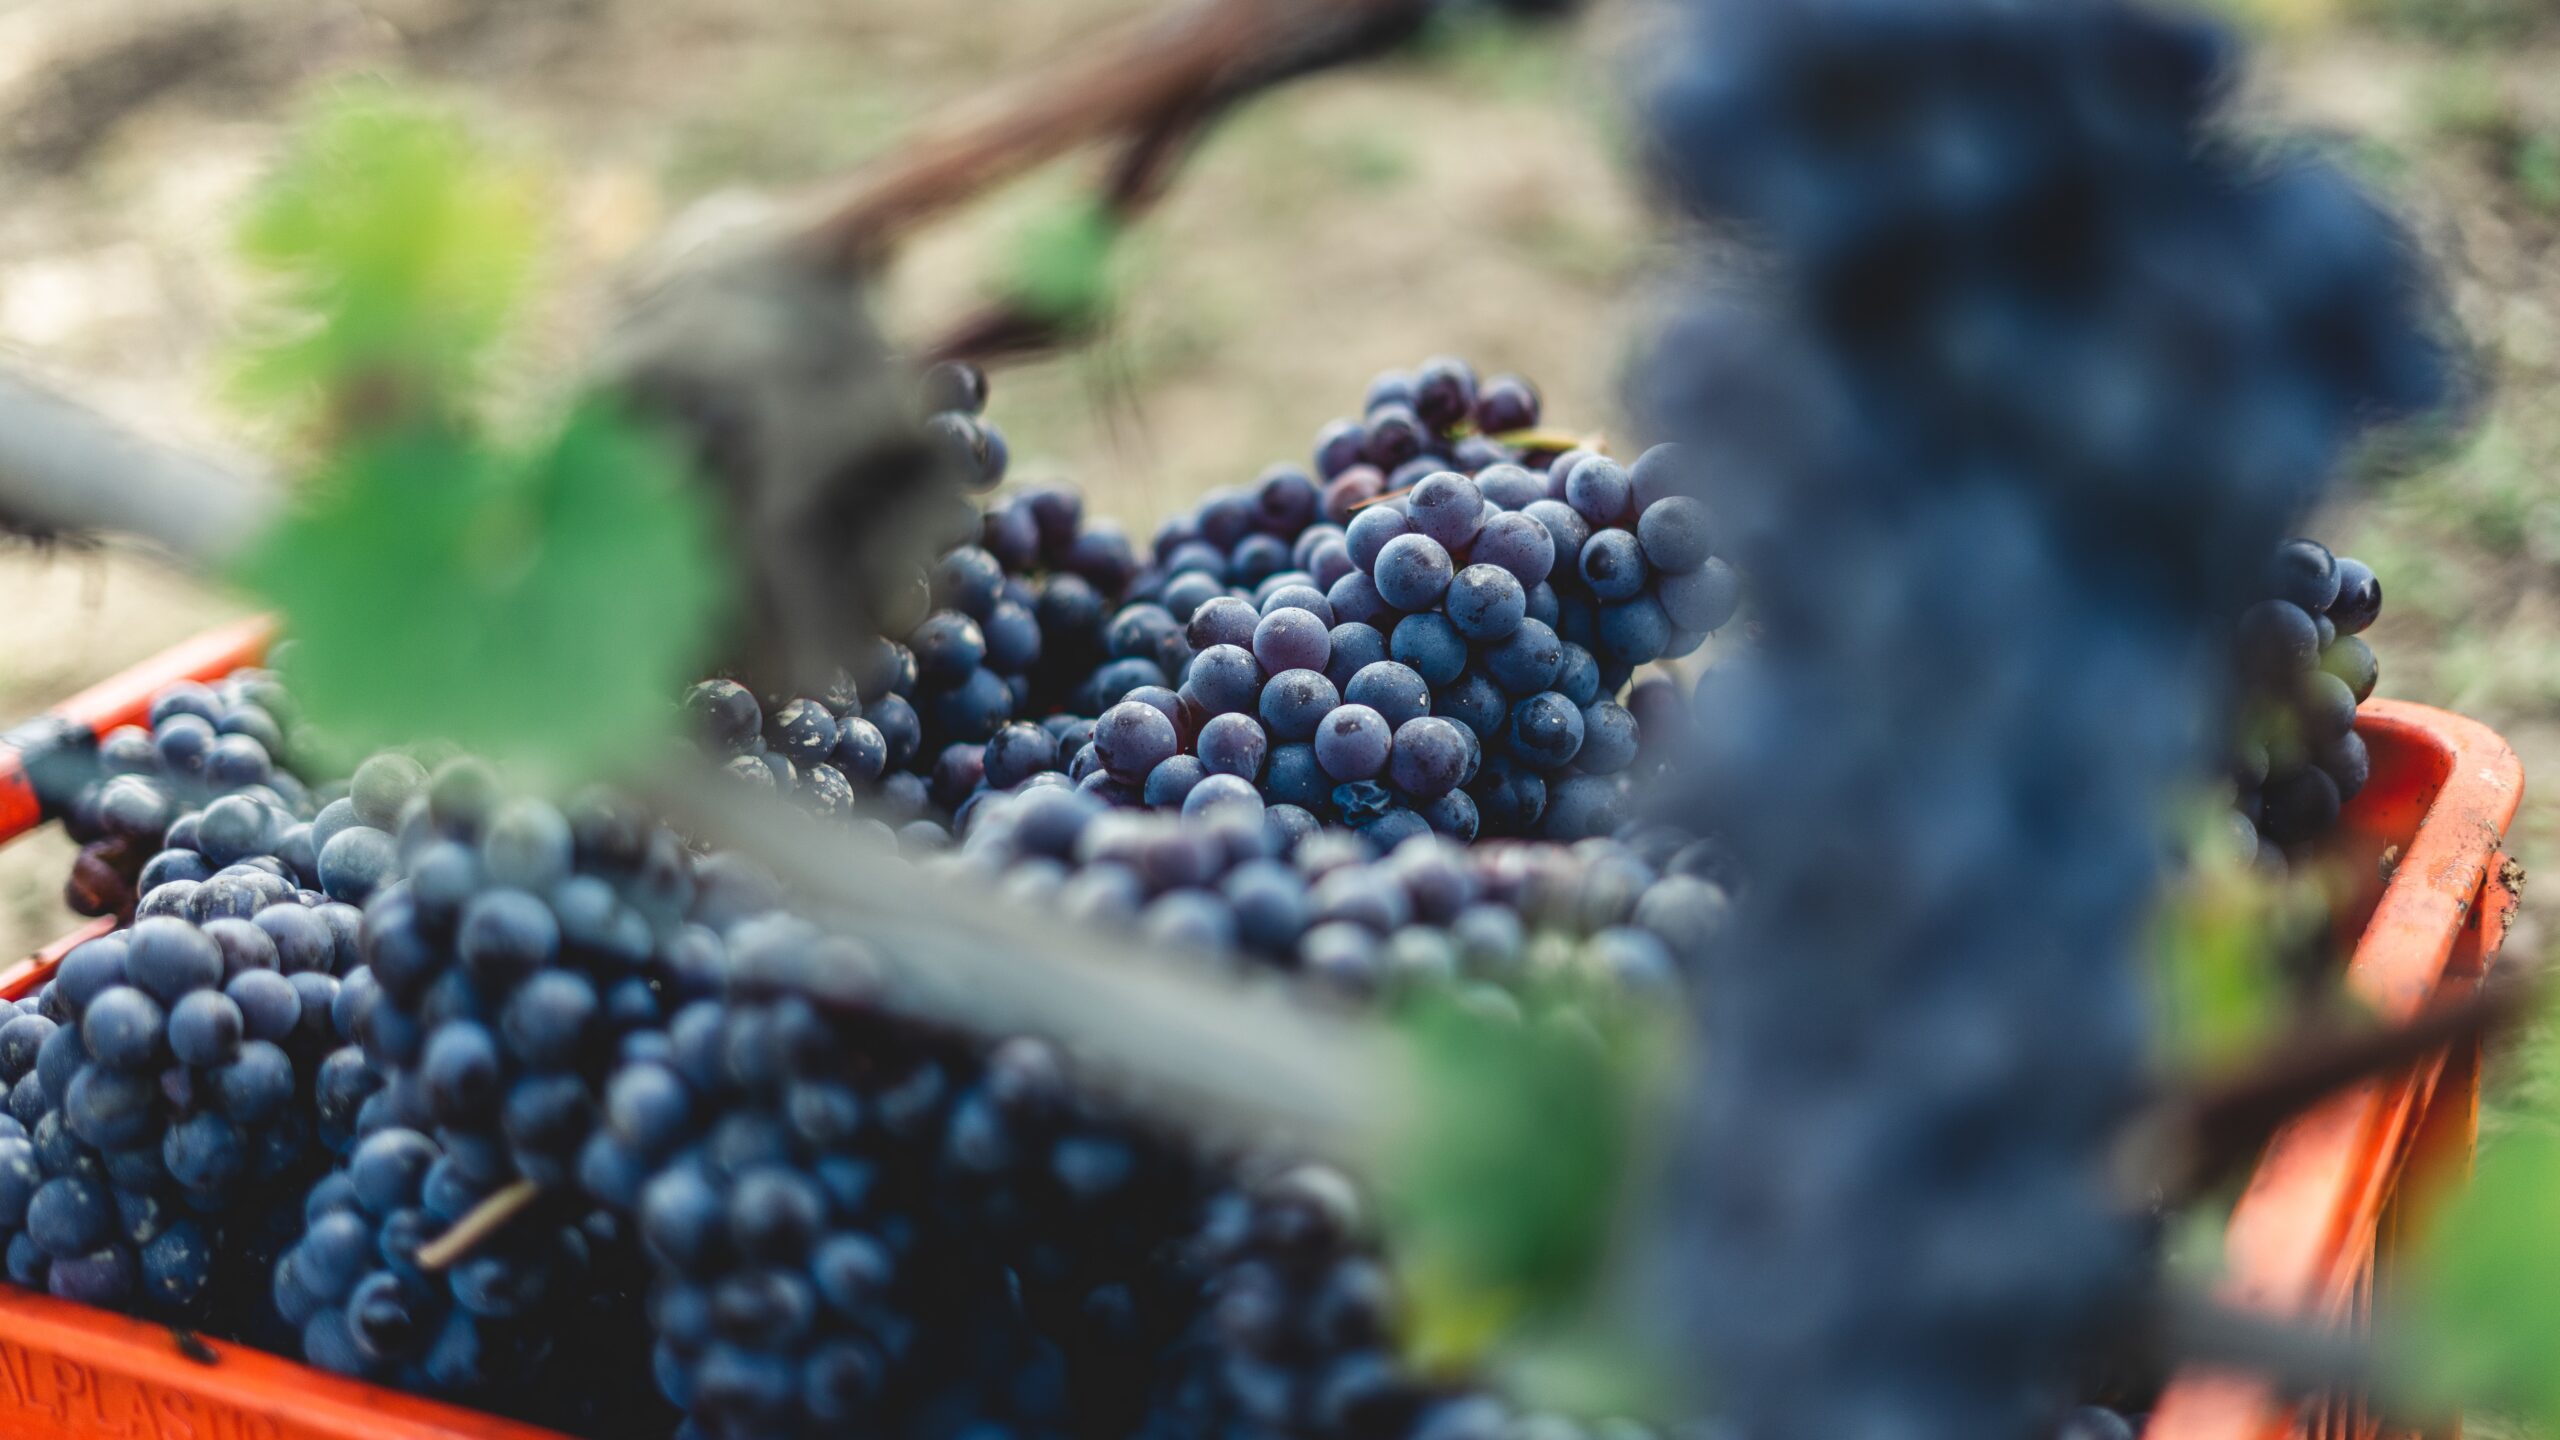 Grapes, Red Wine, Harvesting, Grey, Italy, Plant, Food, Fruit, Langhe, Barolo, Agriculture